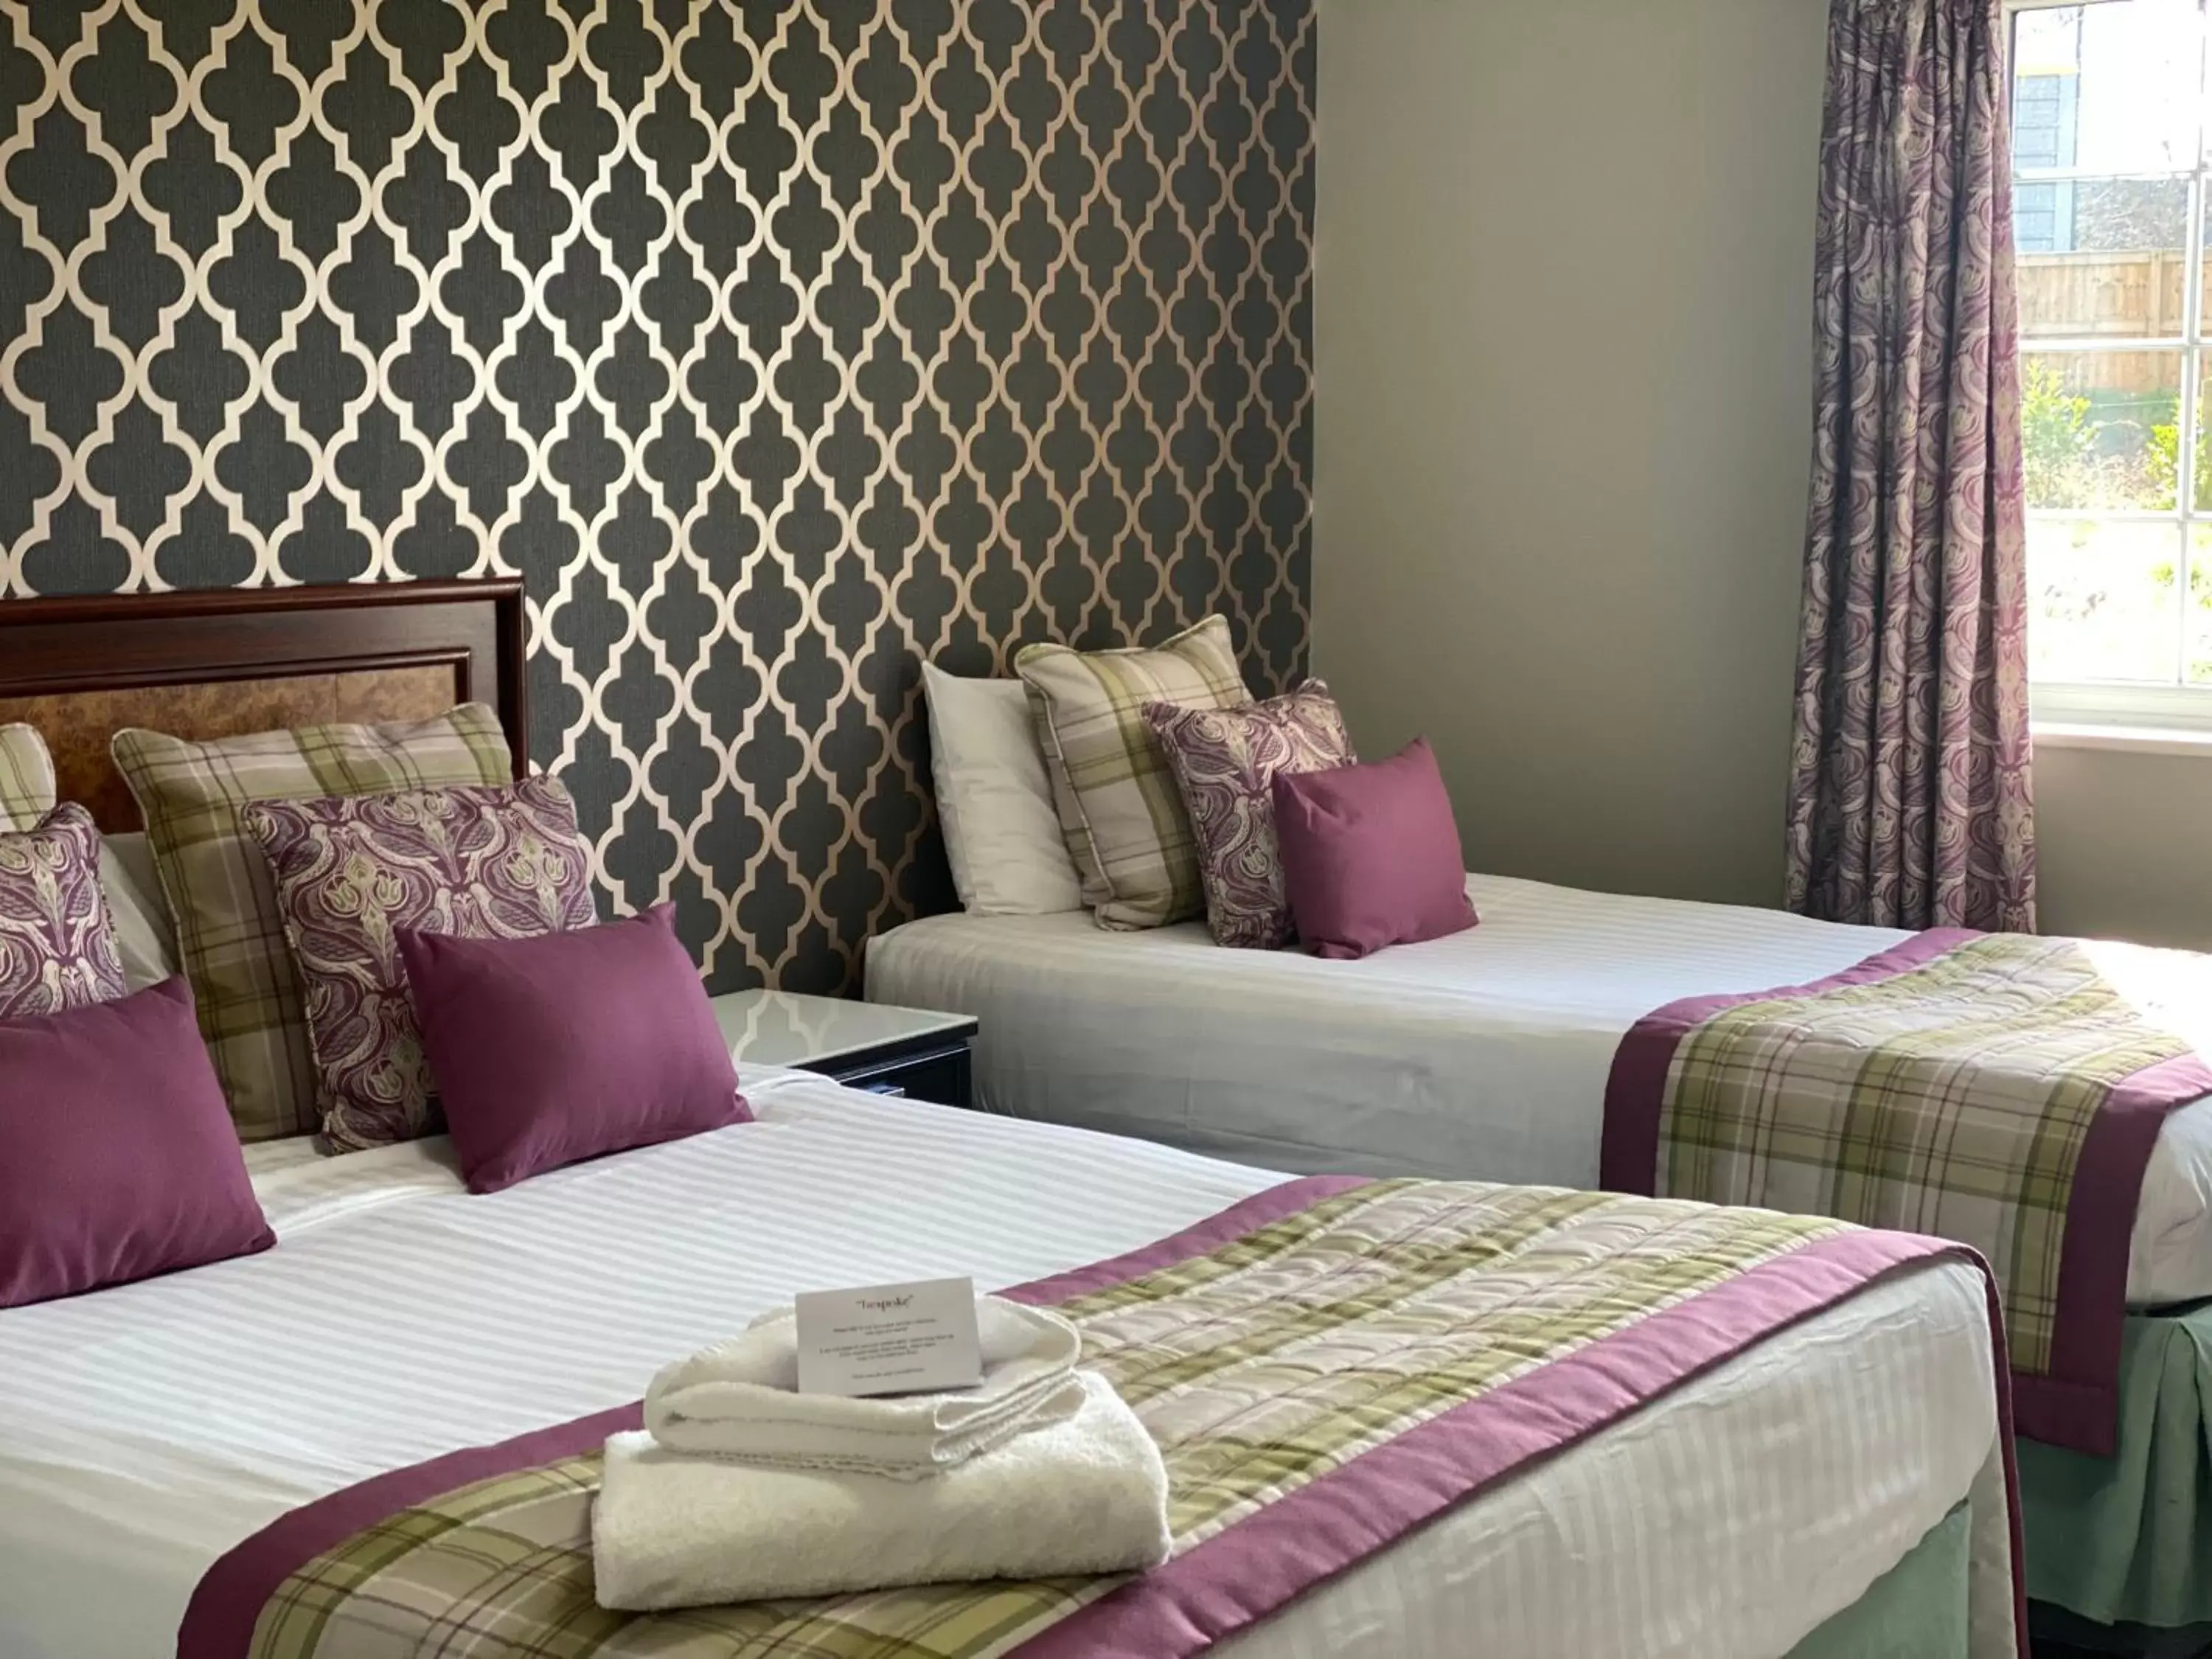 Bed in Stone House Hotel ‘A Bespoke Hotel’